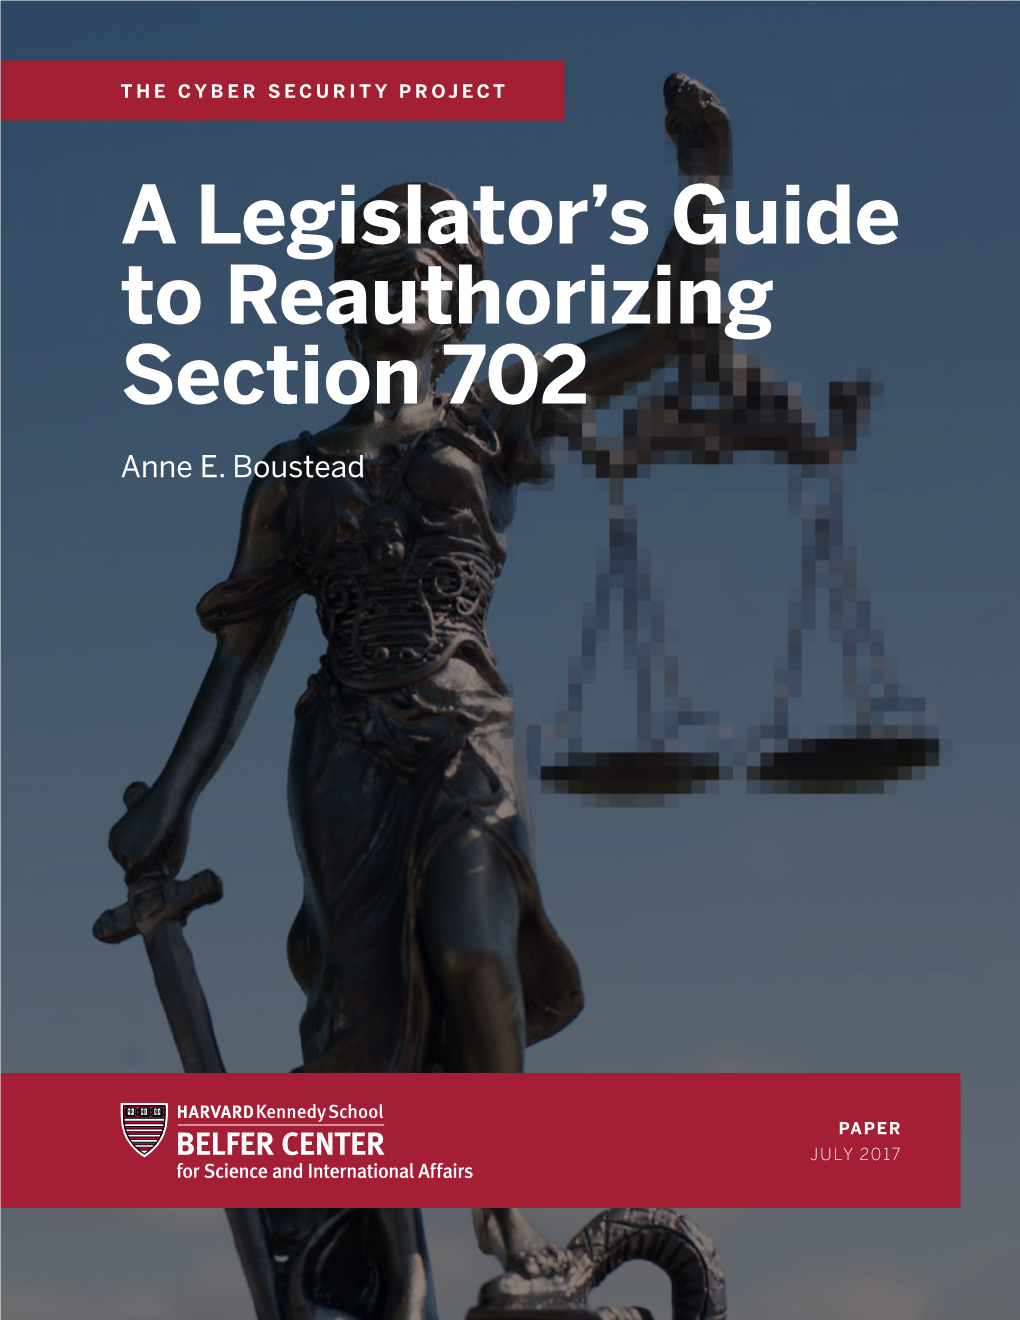 A Legislator's Guide to Reauthorizing Section